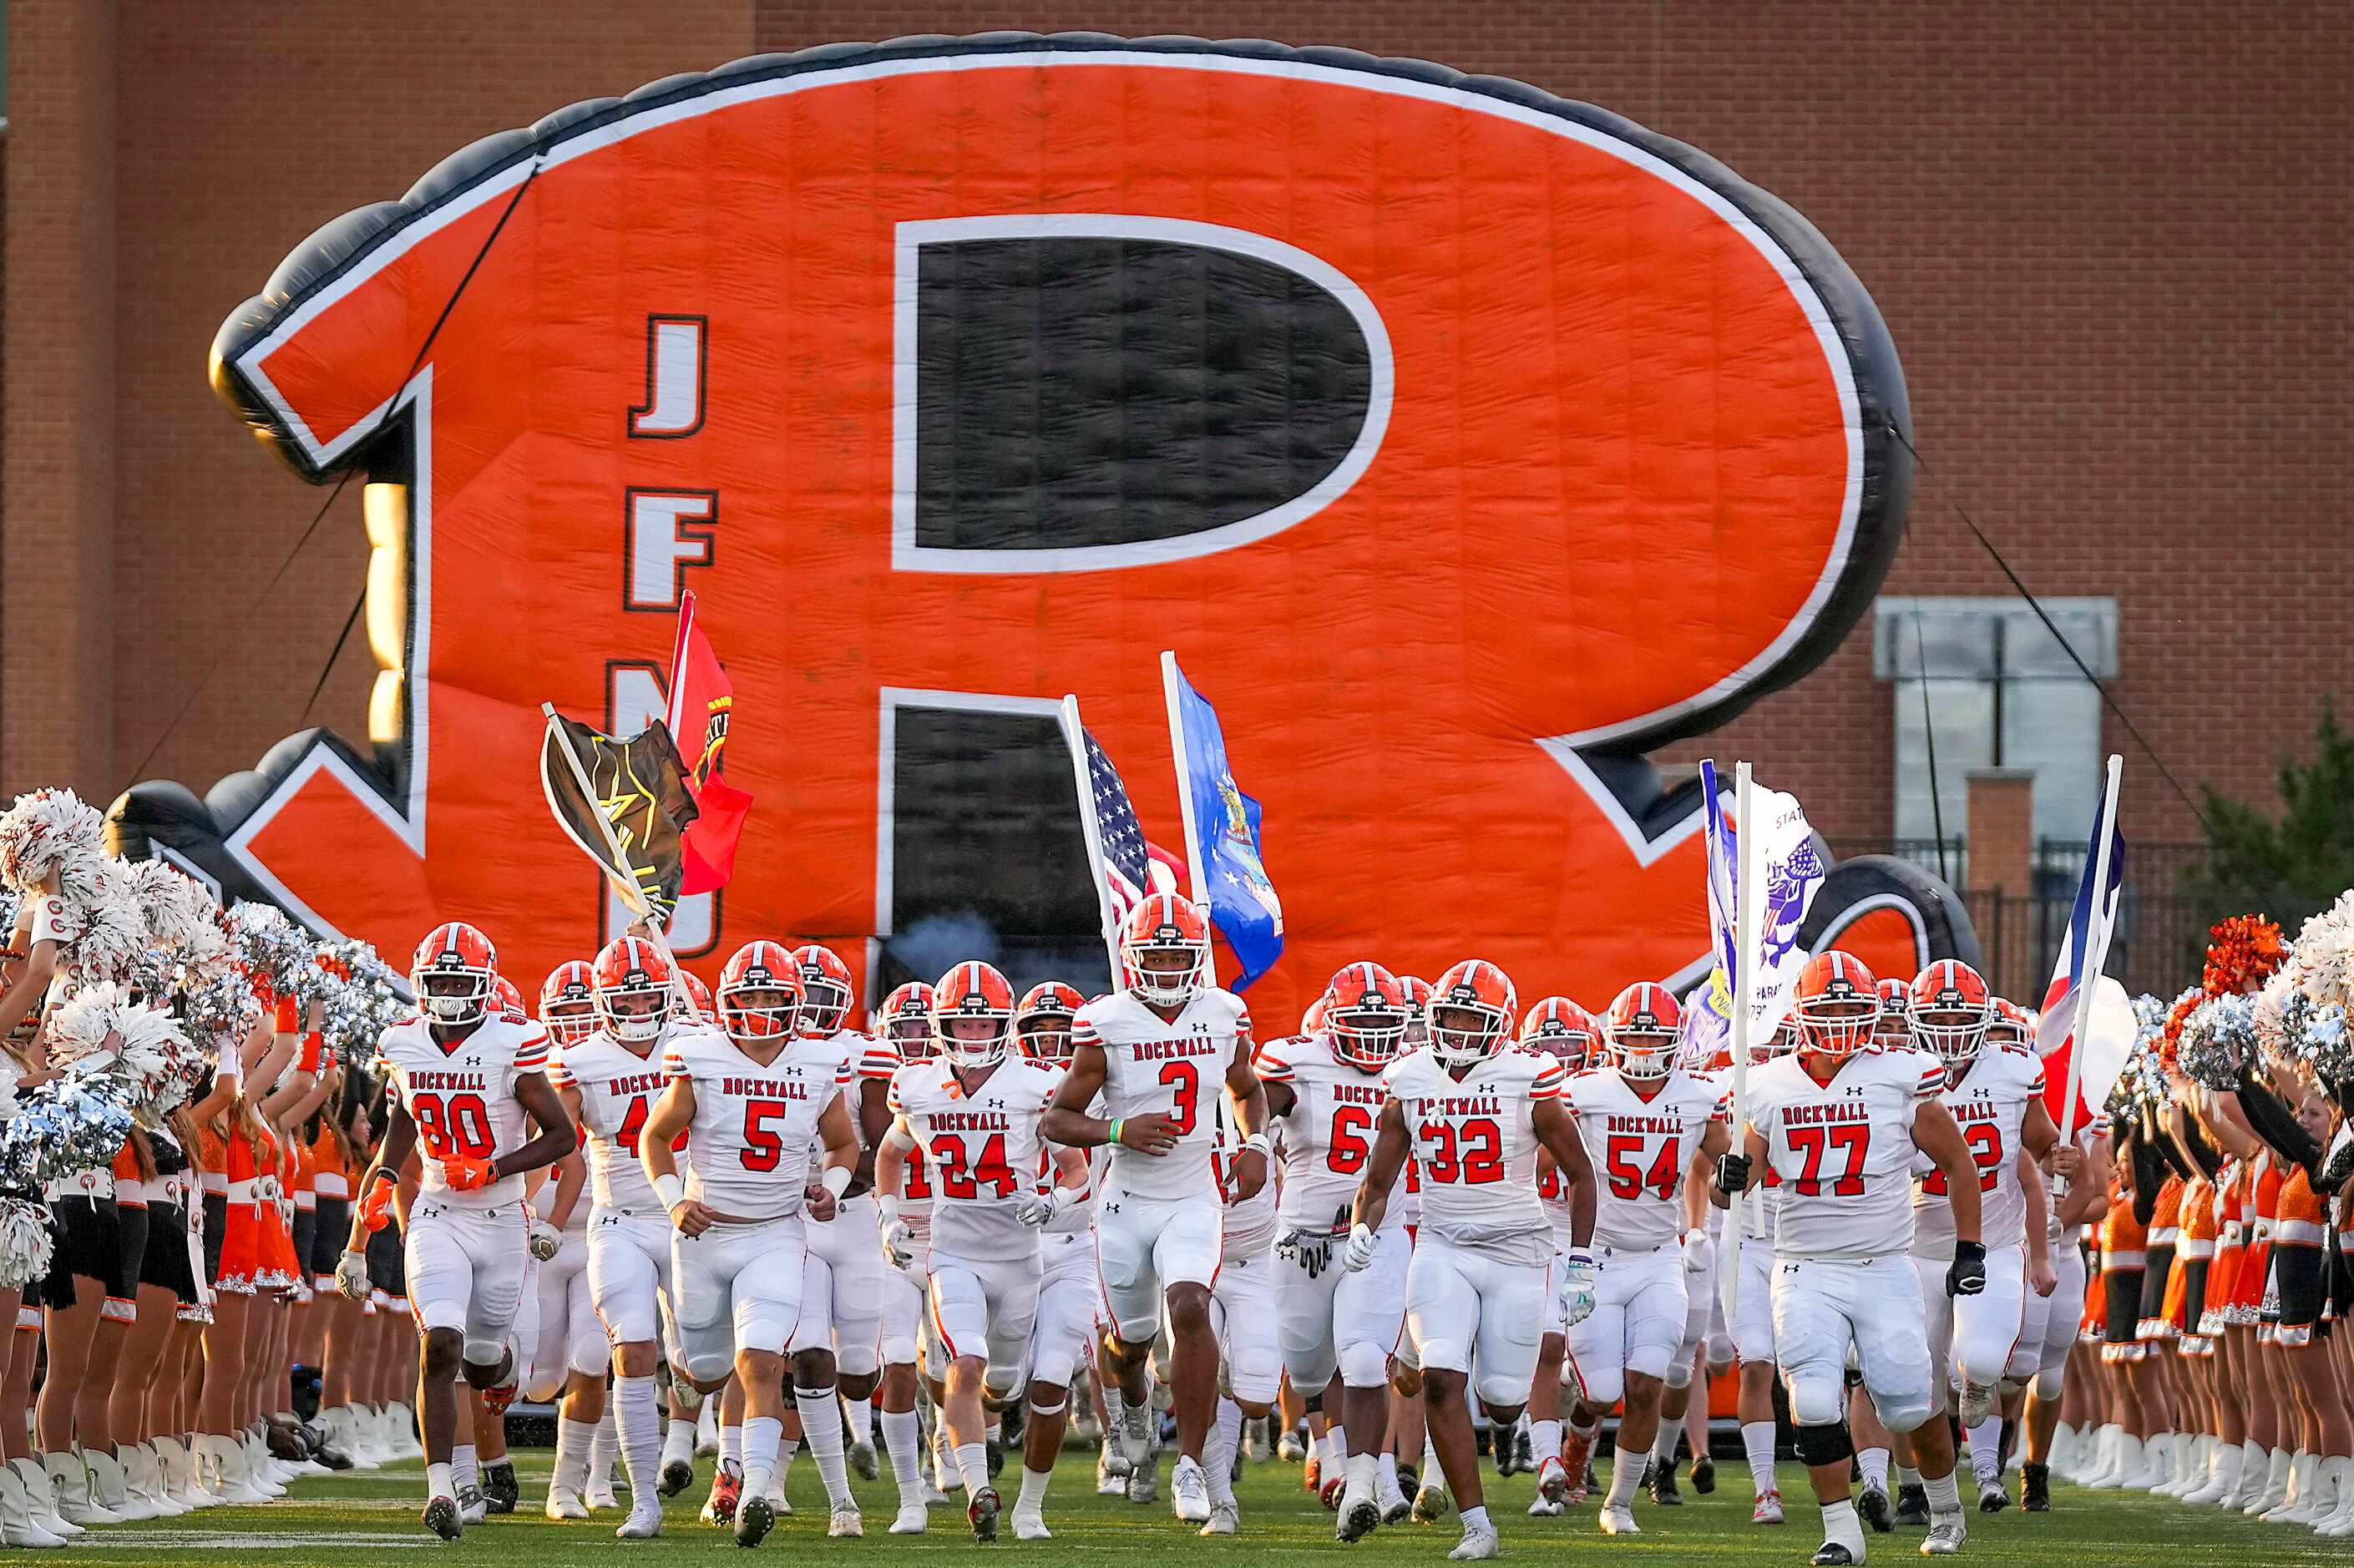 Rockwall players take the field before a District 10-6A high school football game against...